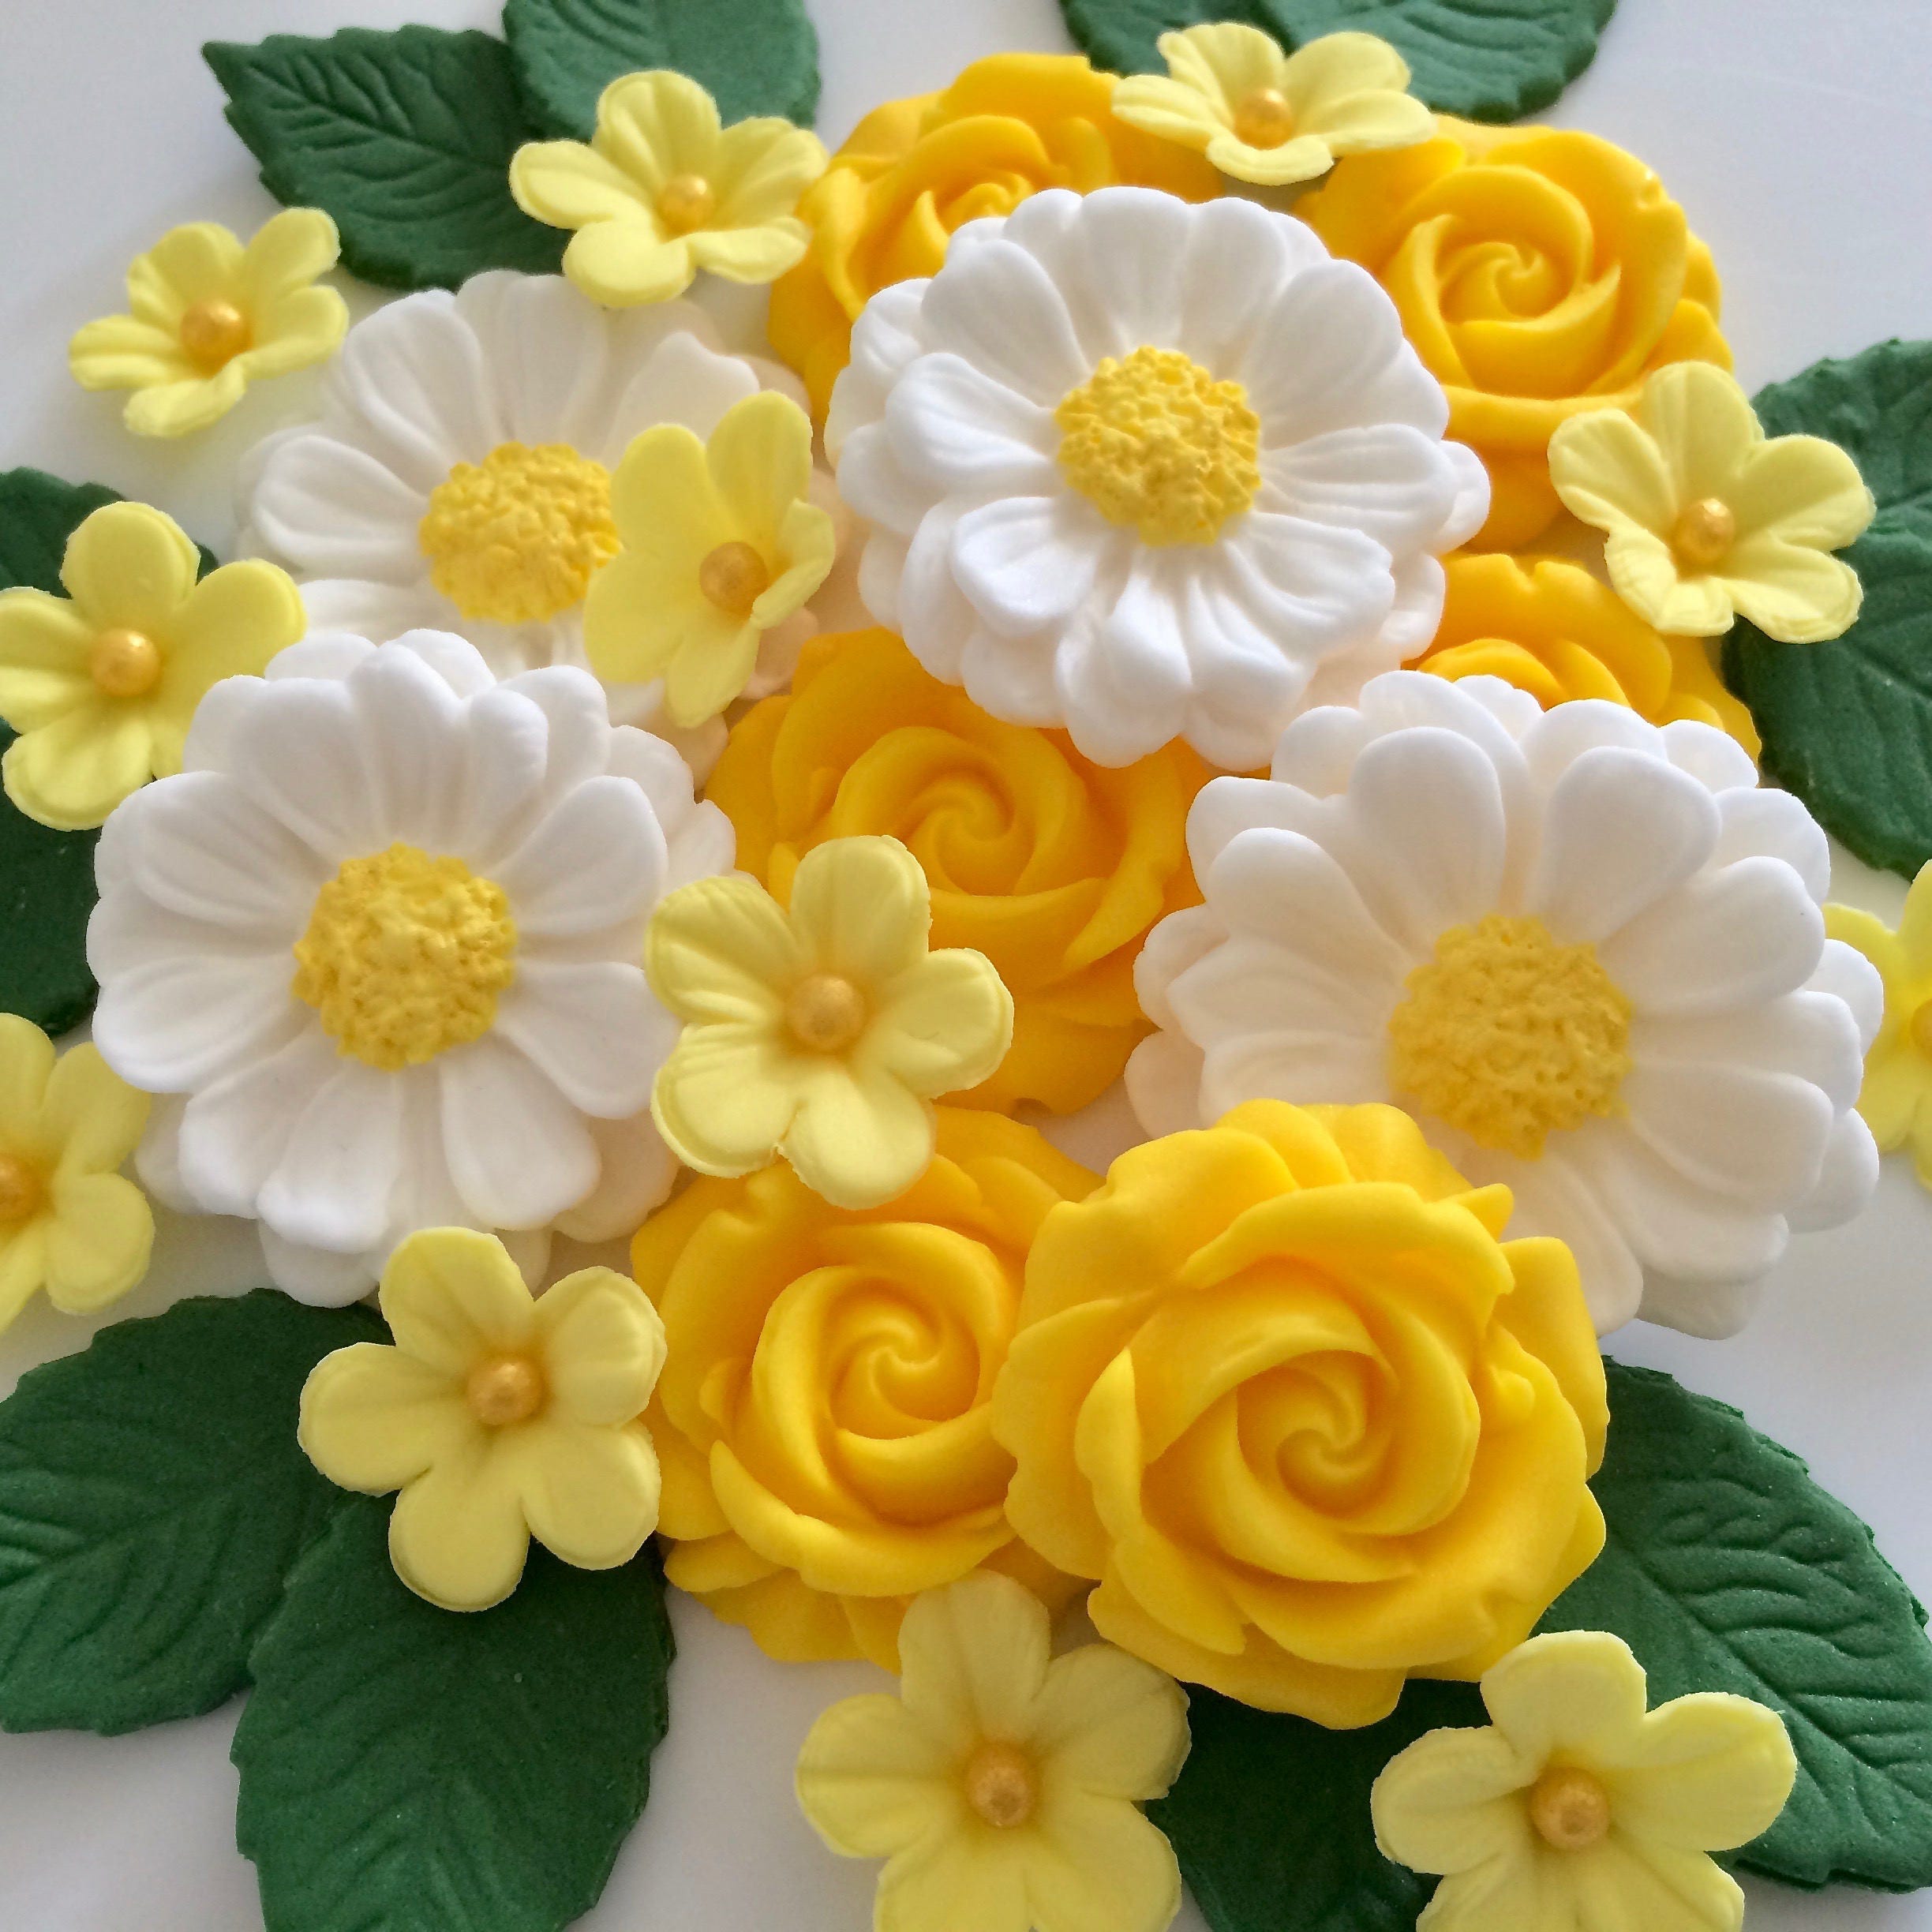 Yellow Rose Bouquet Sugar Flowers Edible Cake Decorations - Etsy